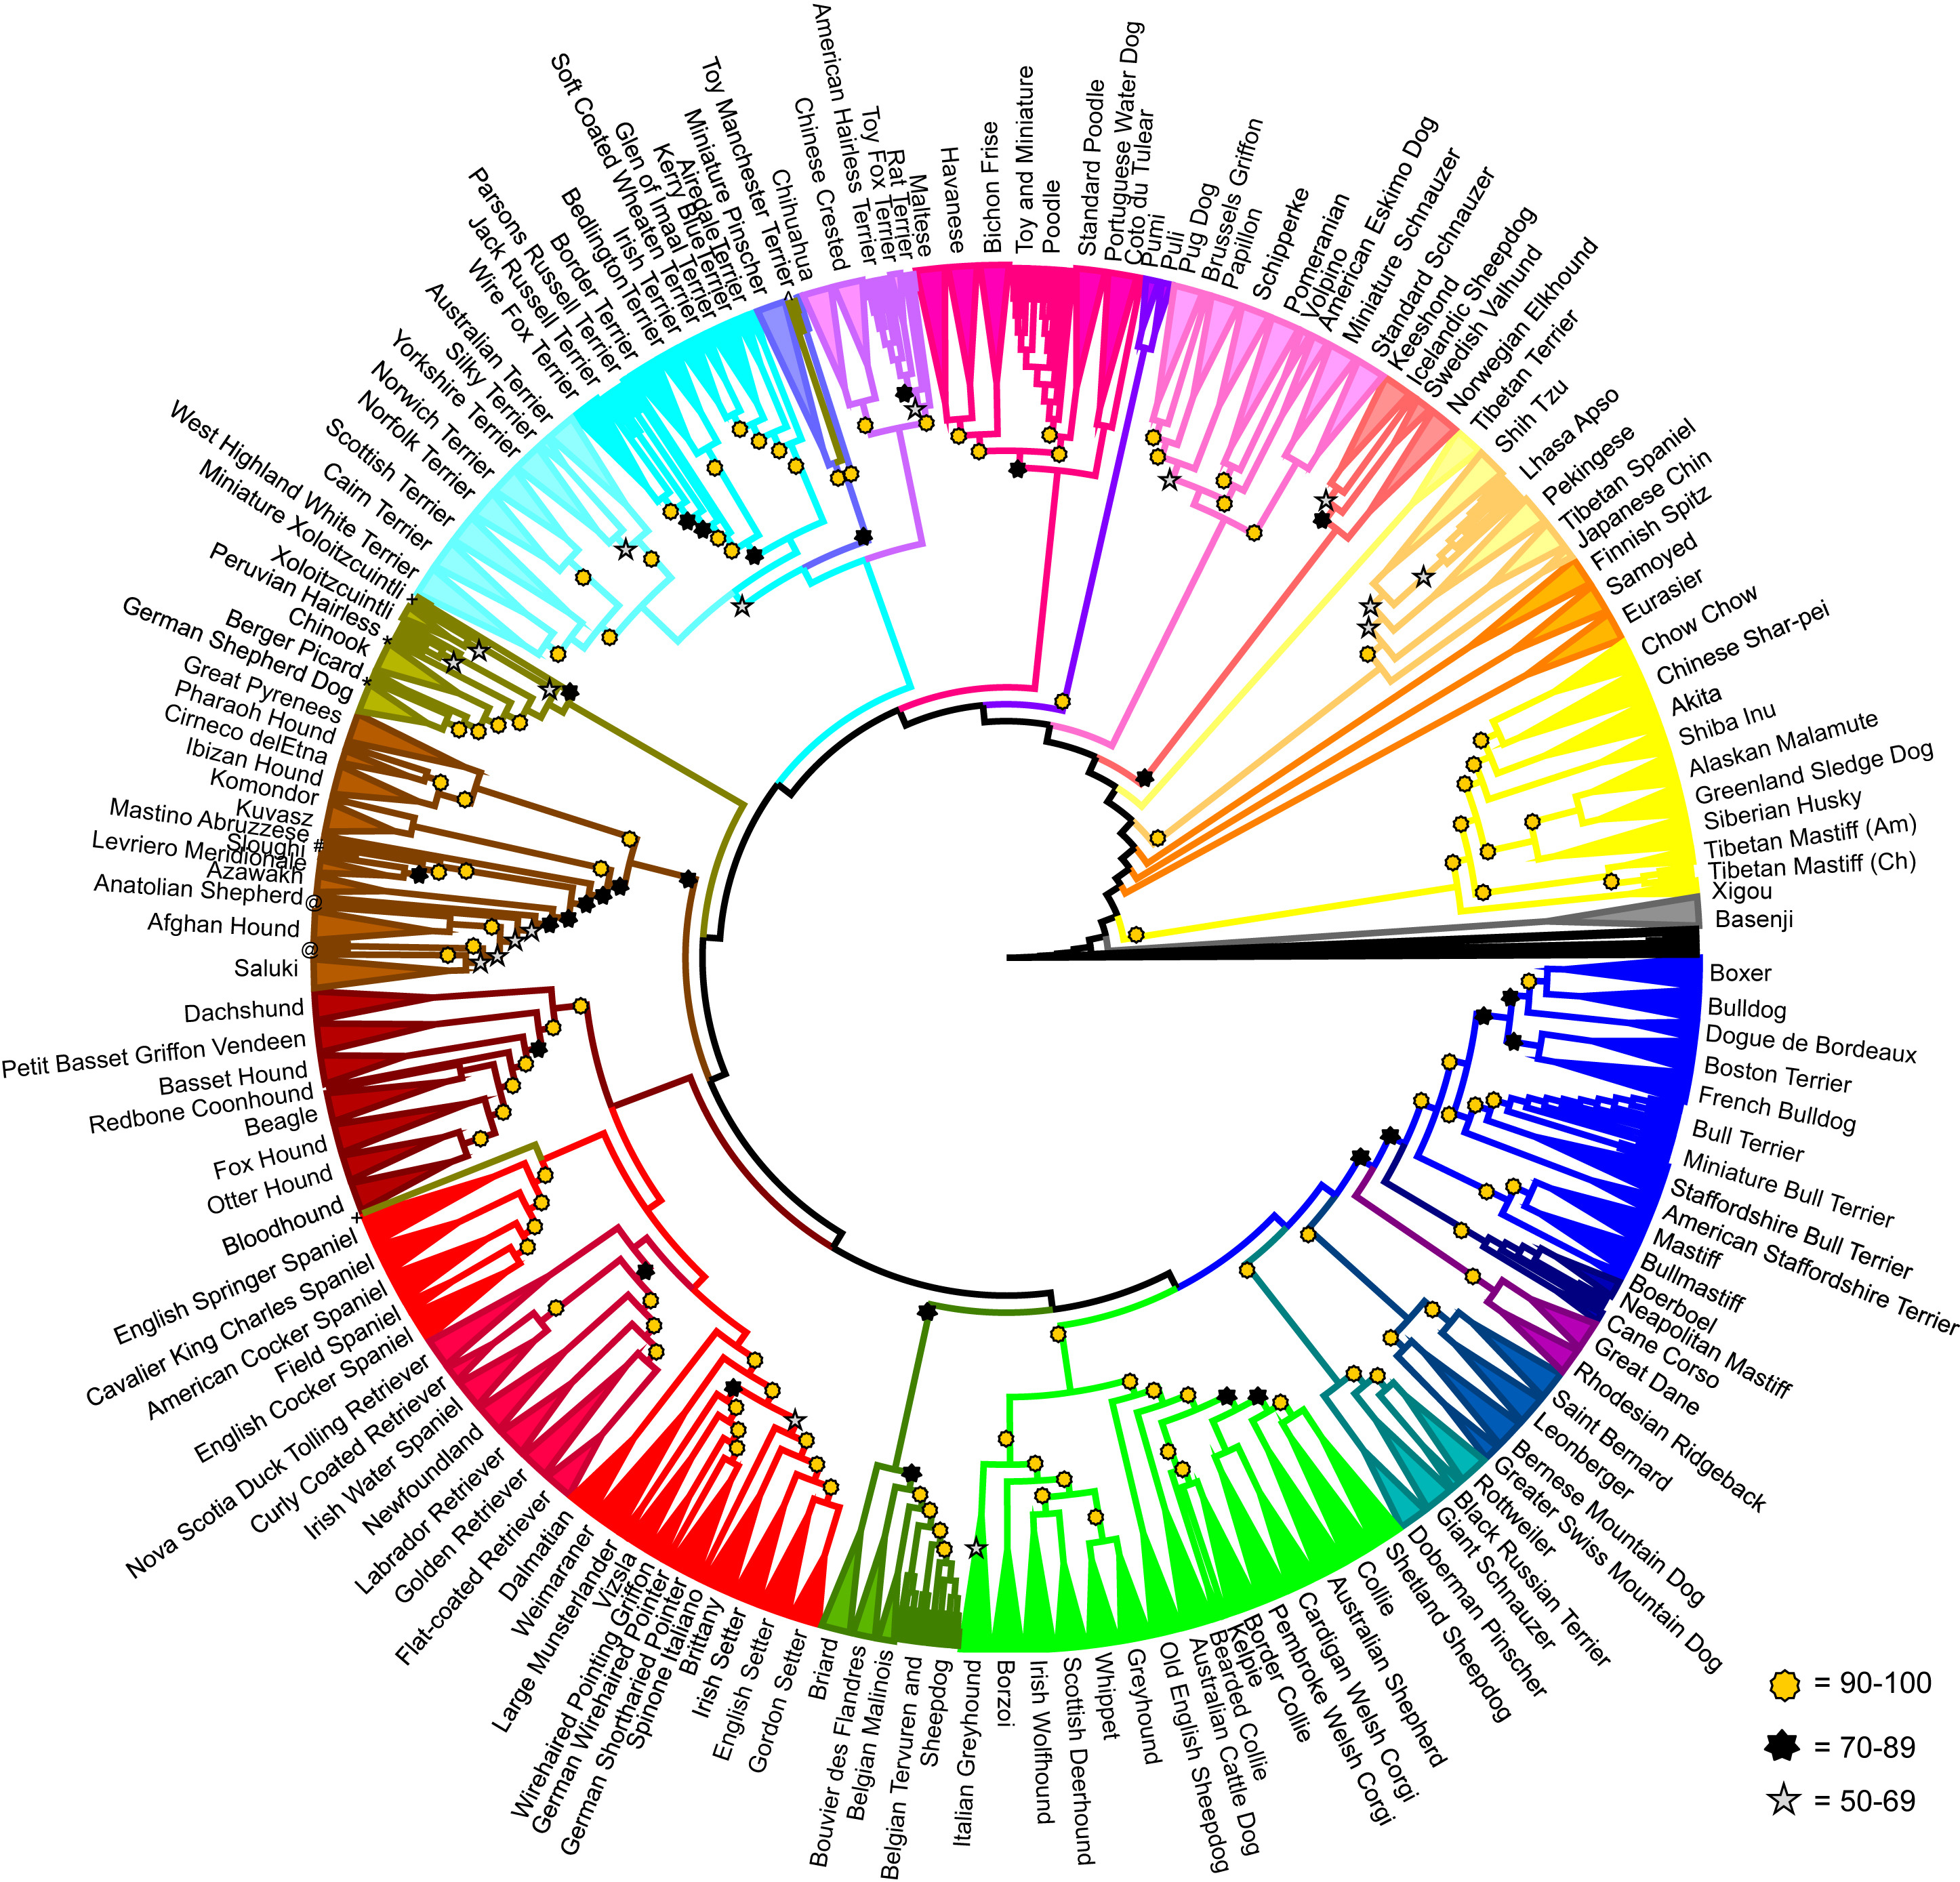 A phylogenetic tree showing the relationships of 161 domestic dog breeds.